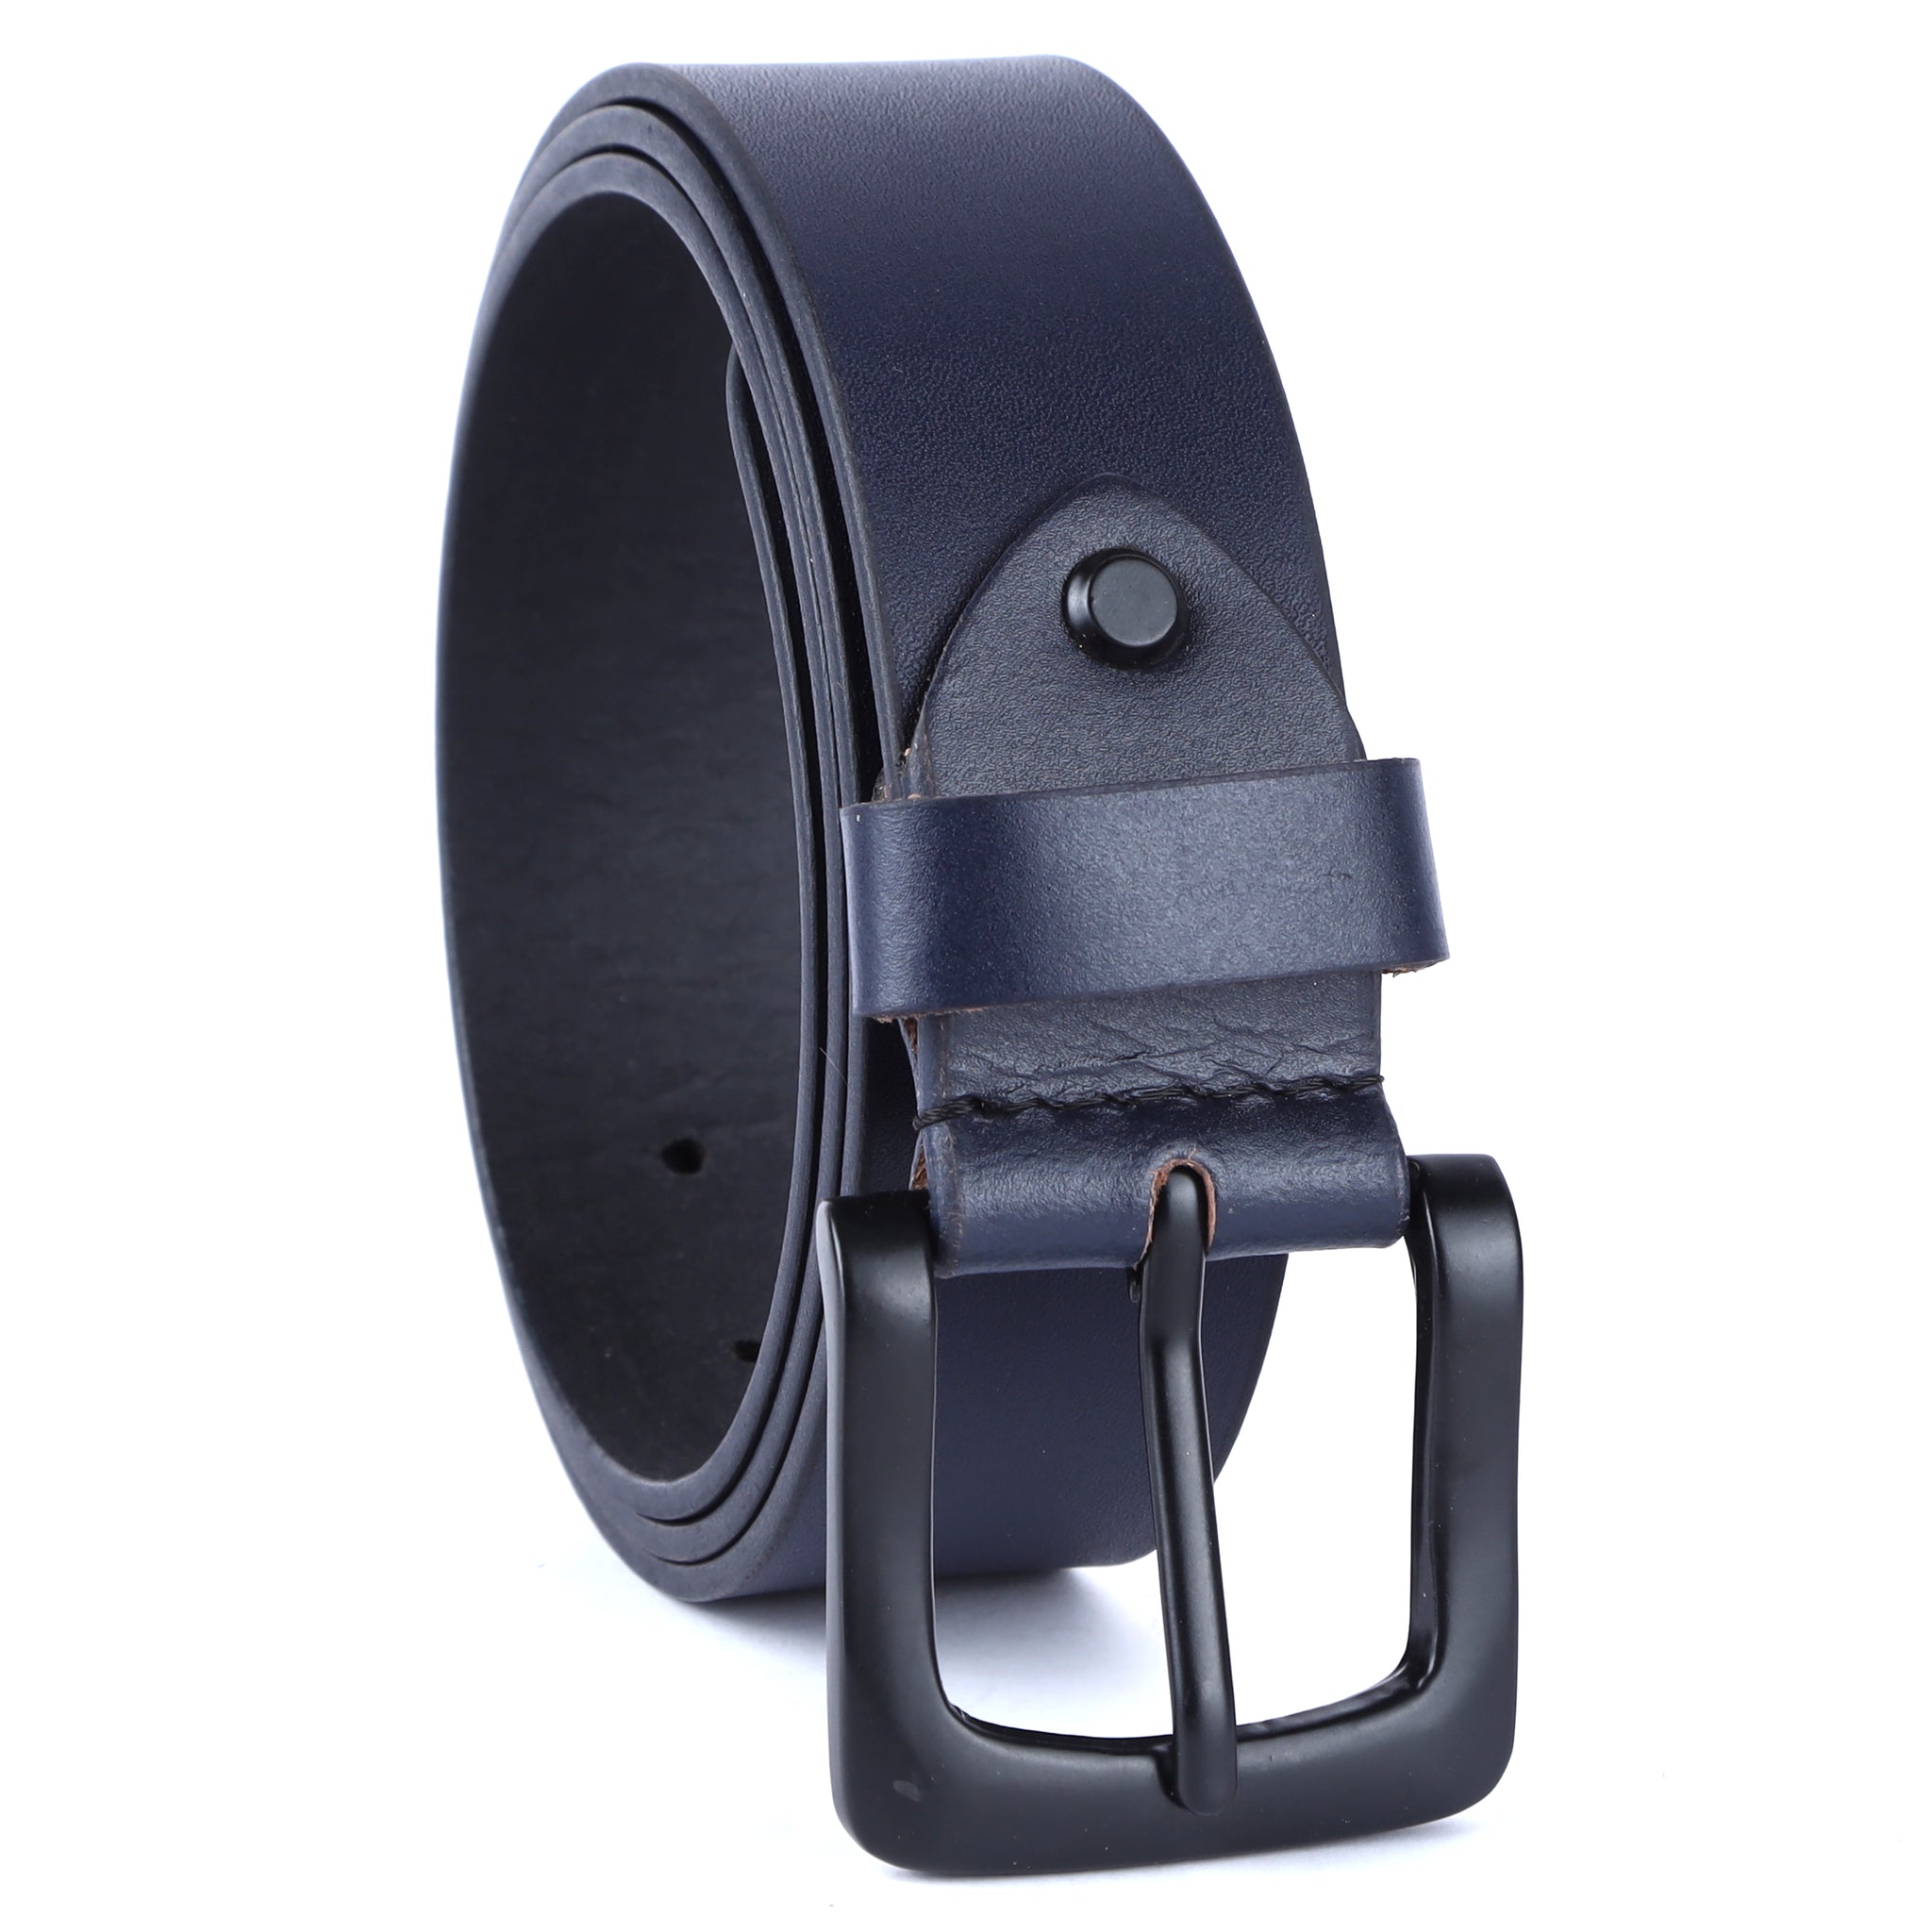 Premium Pure Leather Belt for Men - Fits Waist Sizes 28-46, 1.5 Inch Width - Ideal for Casual & Formal Use